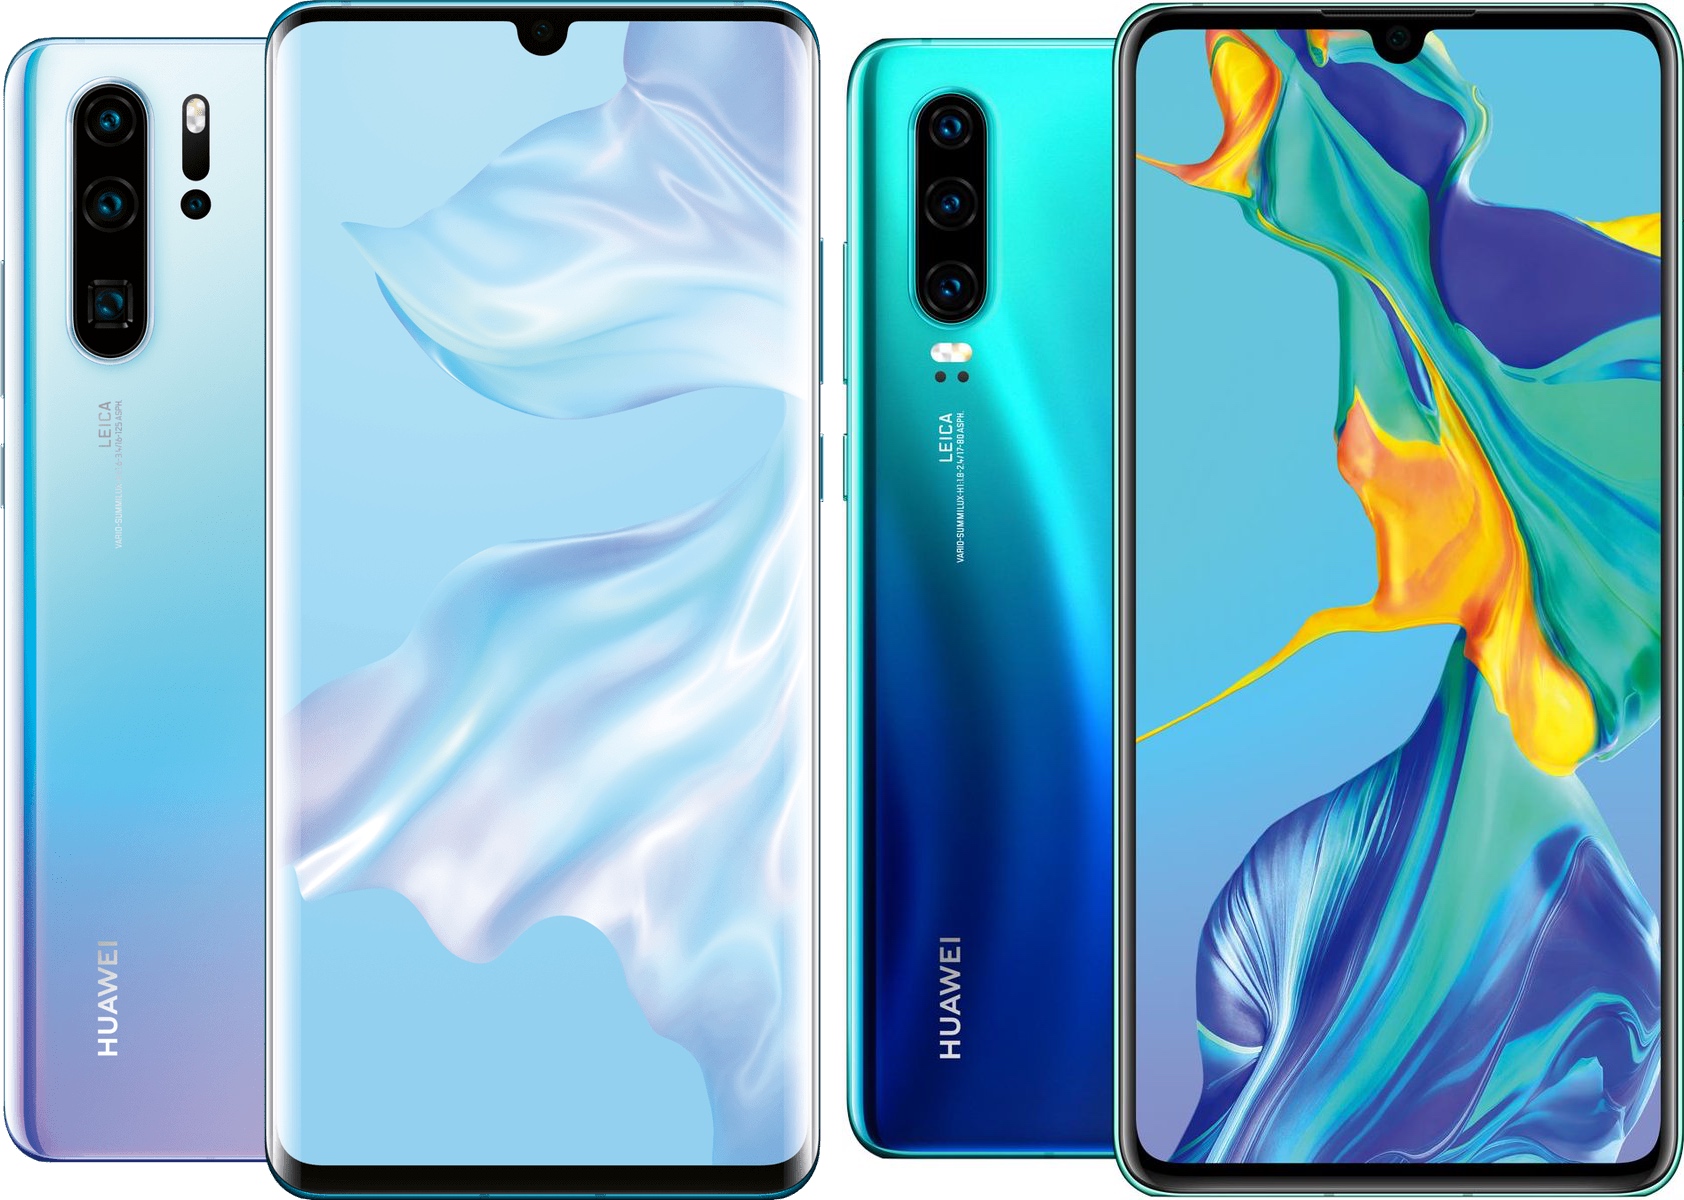 This is what the Huawei P30 will look like